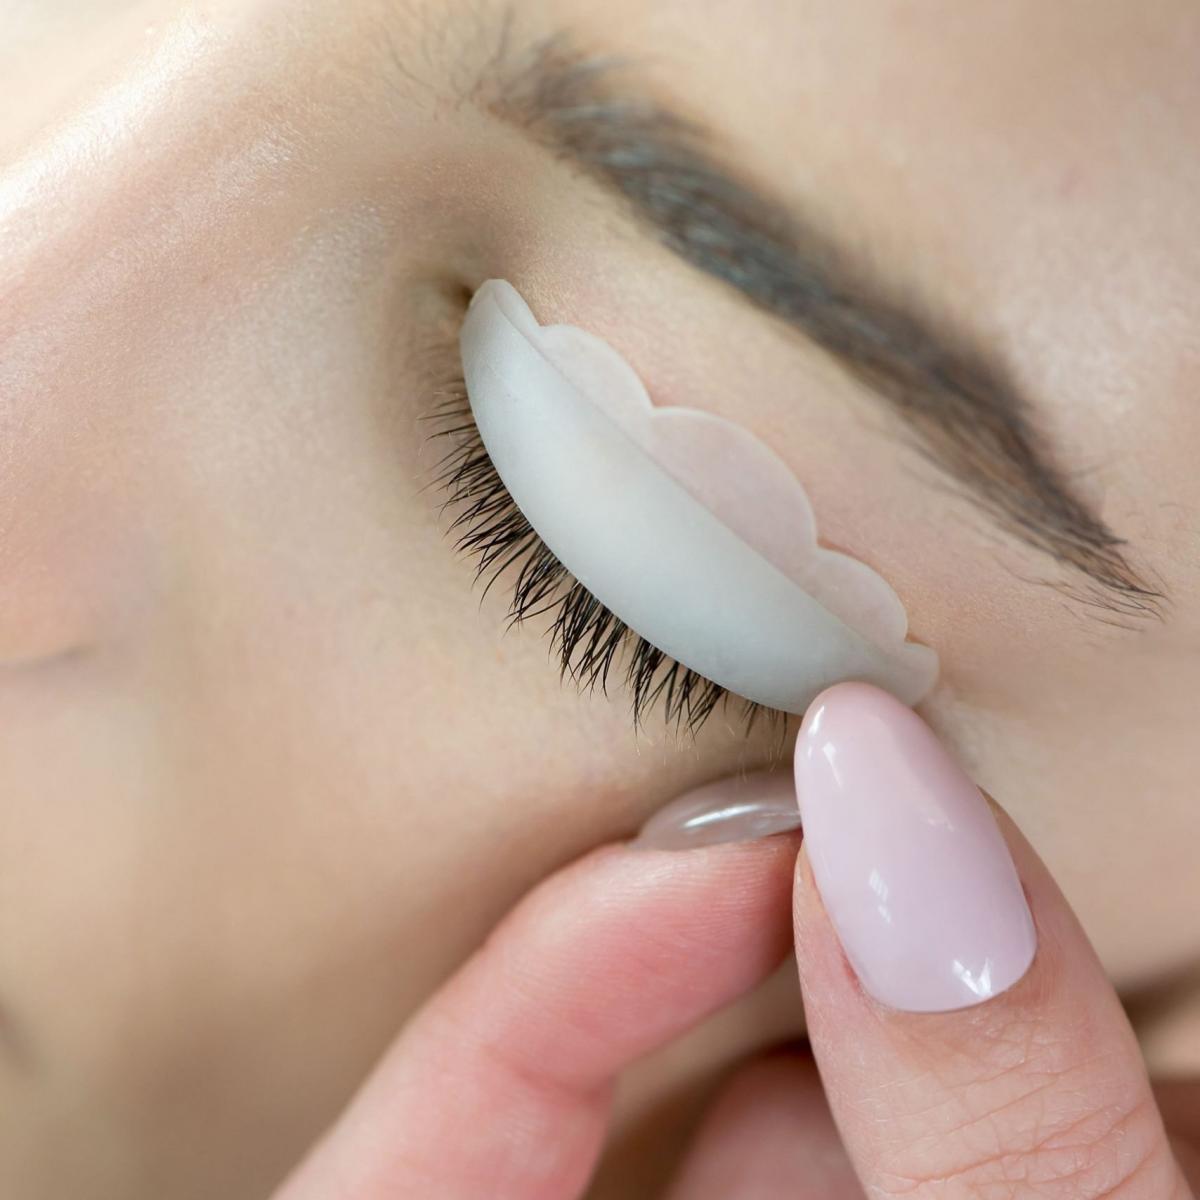 Choosing Your Lash Lift Pad Based on the Perm You Want